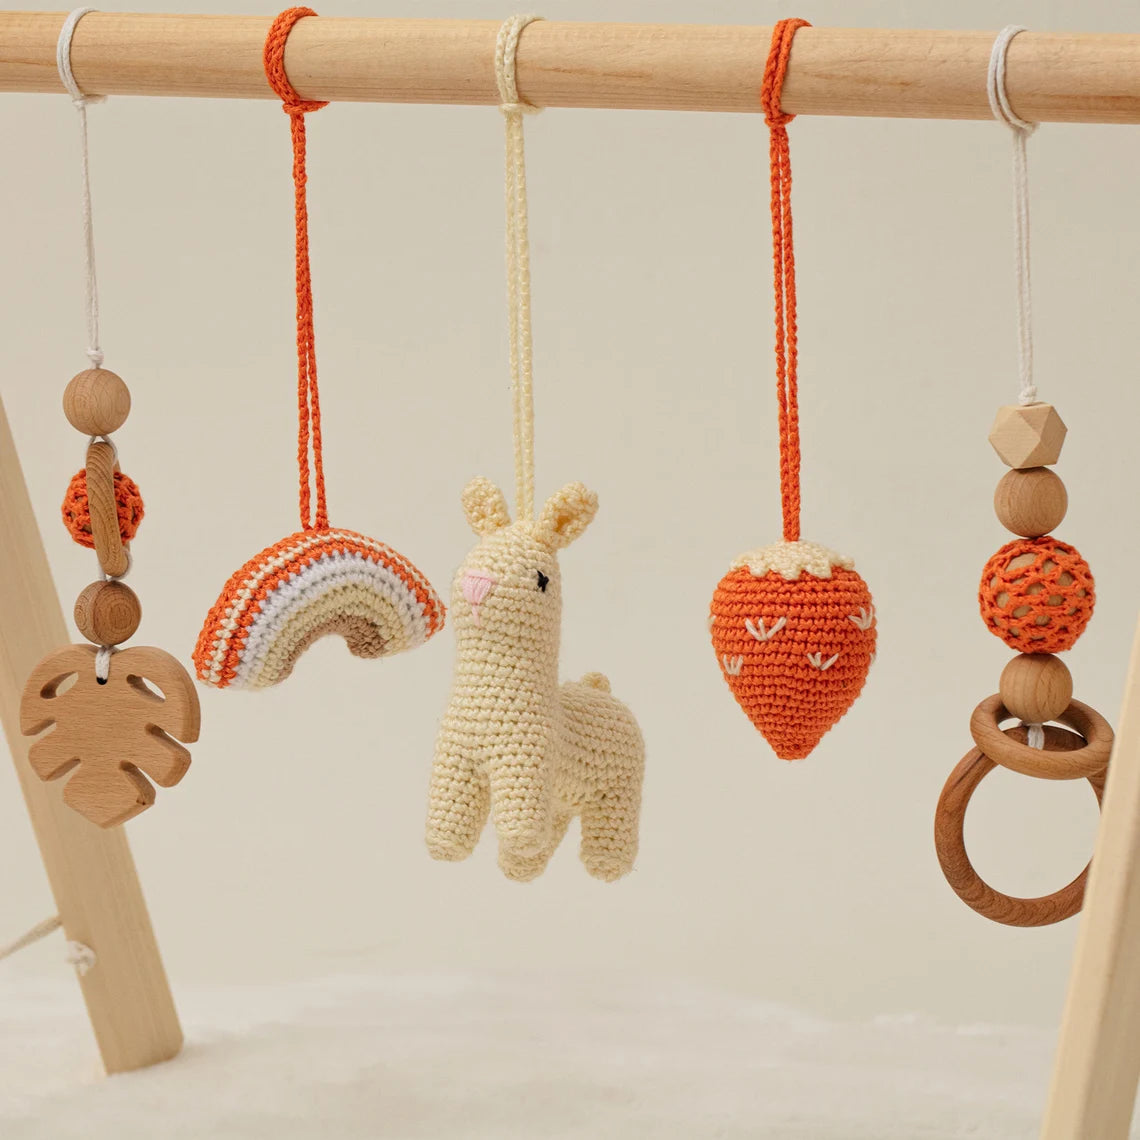 Baby Play Gym, Crocheted Toys / HANDMADE / Personalized Crochet Letters